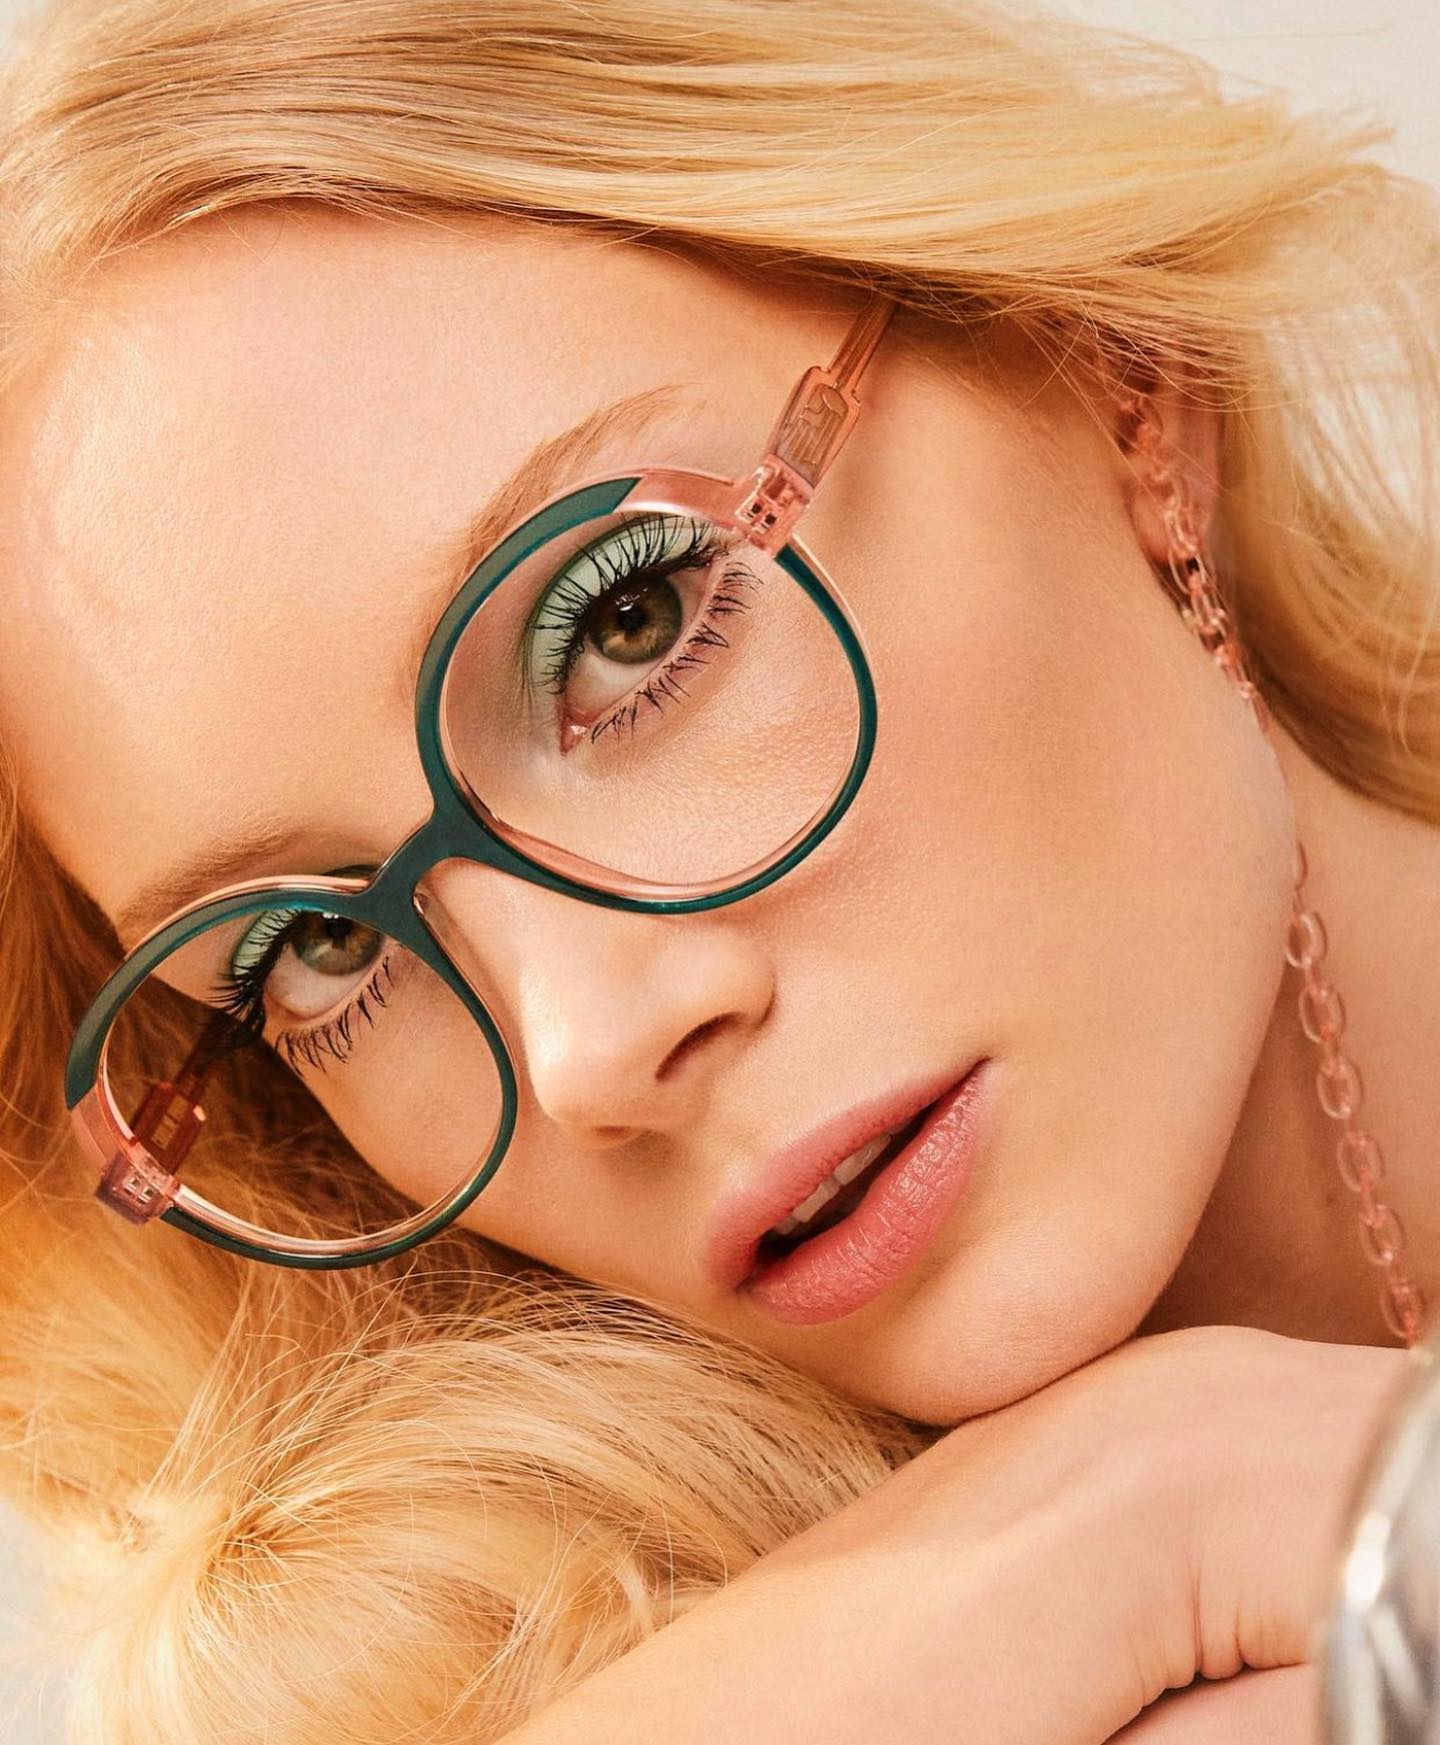 All these beautiful eyeglasses are in stock, come and see @optiekvanlindt ❤️😘 #carolineabram #parisian #designer #optical #glasses #thin #light #colorful #fresh #new #stock